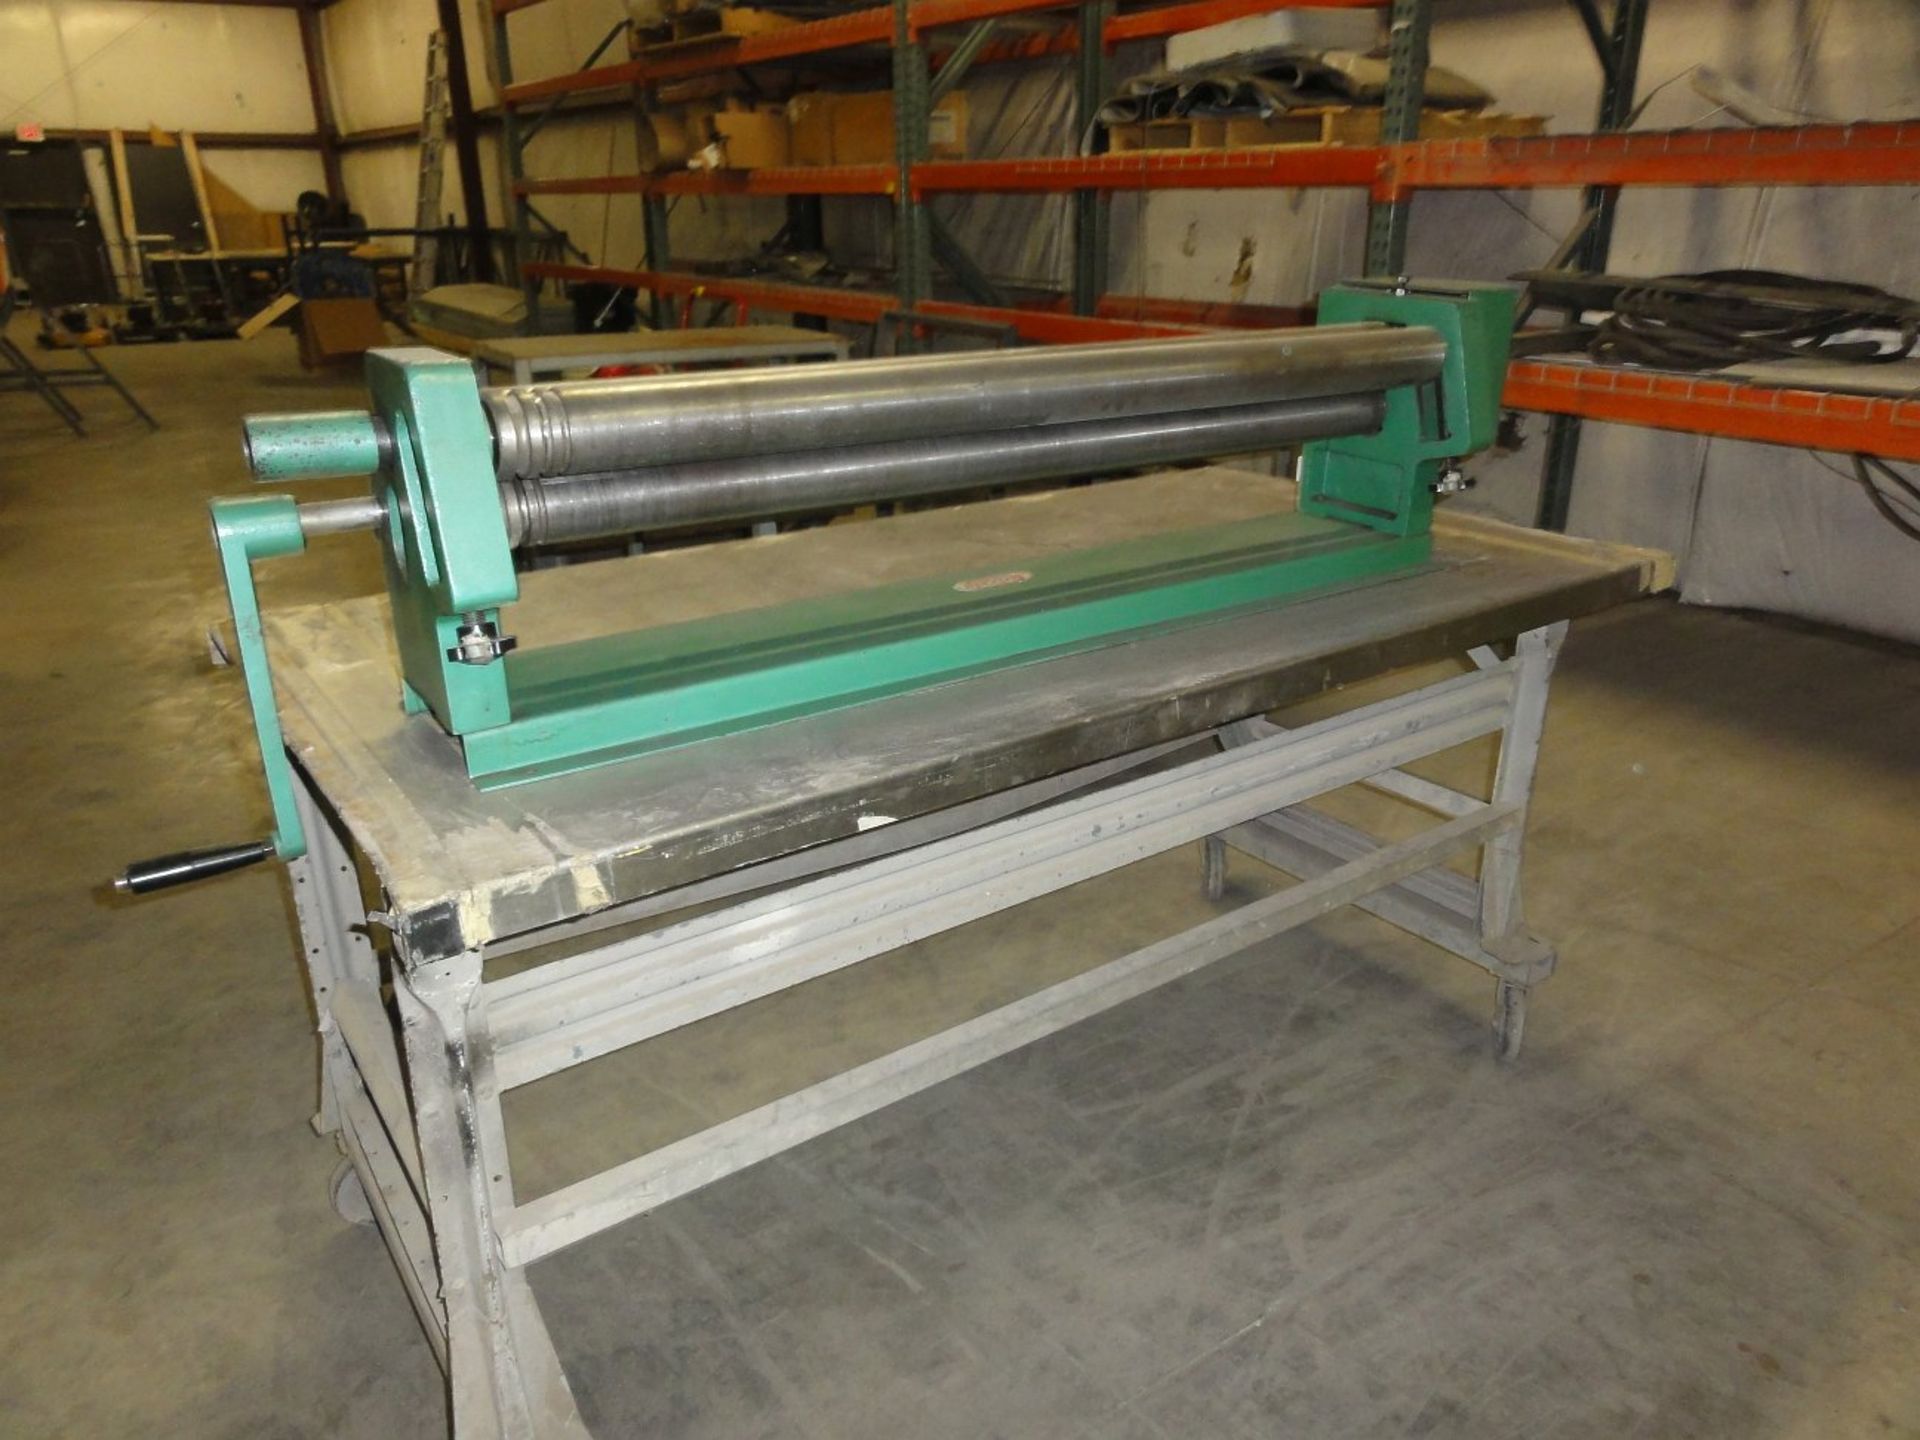 Grizzly Industrial Slip Roll, 50" x 16 ga., SN 100917 - Image 2 of 2